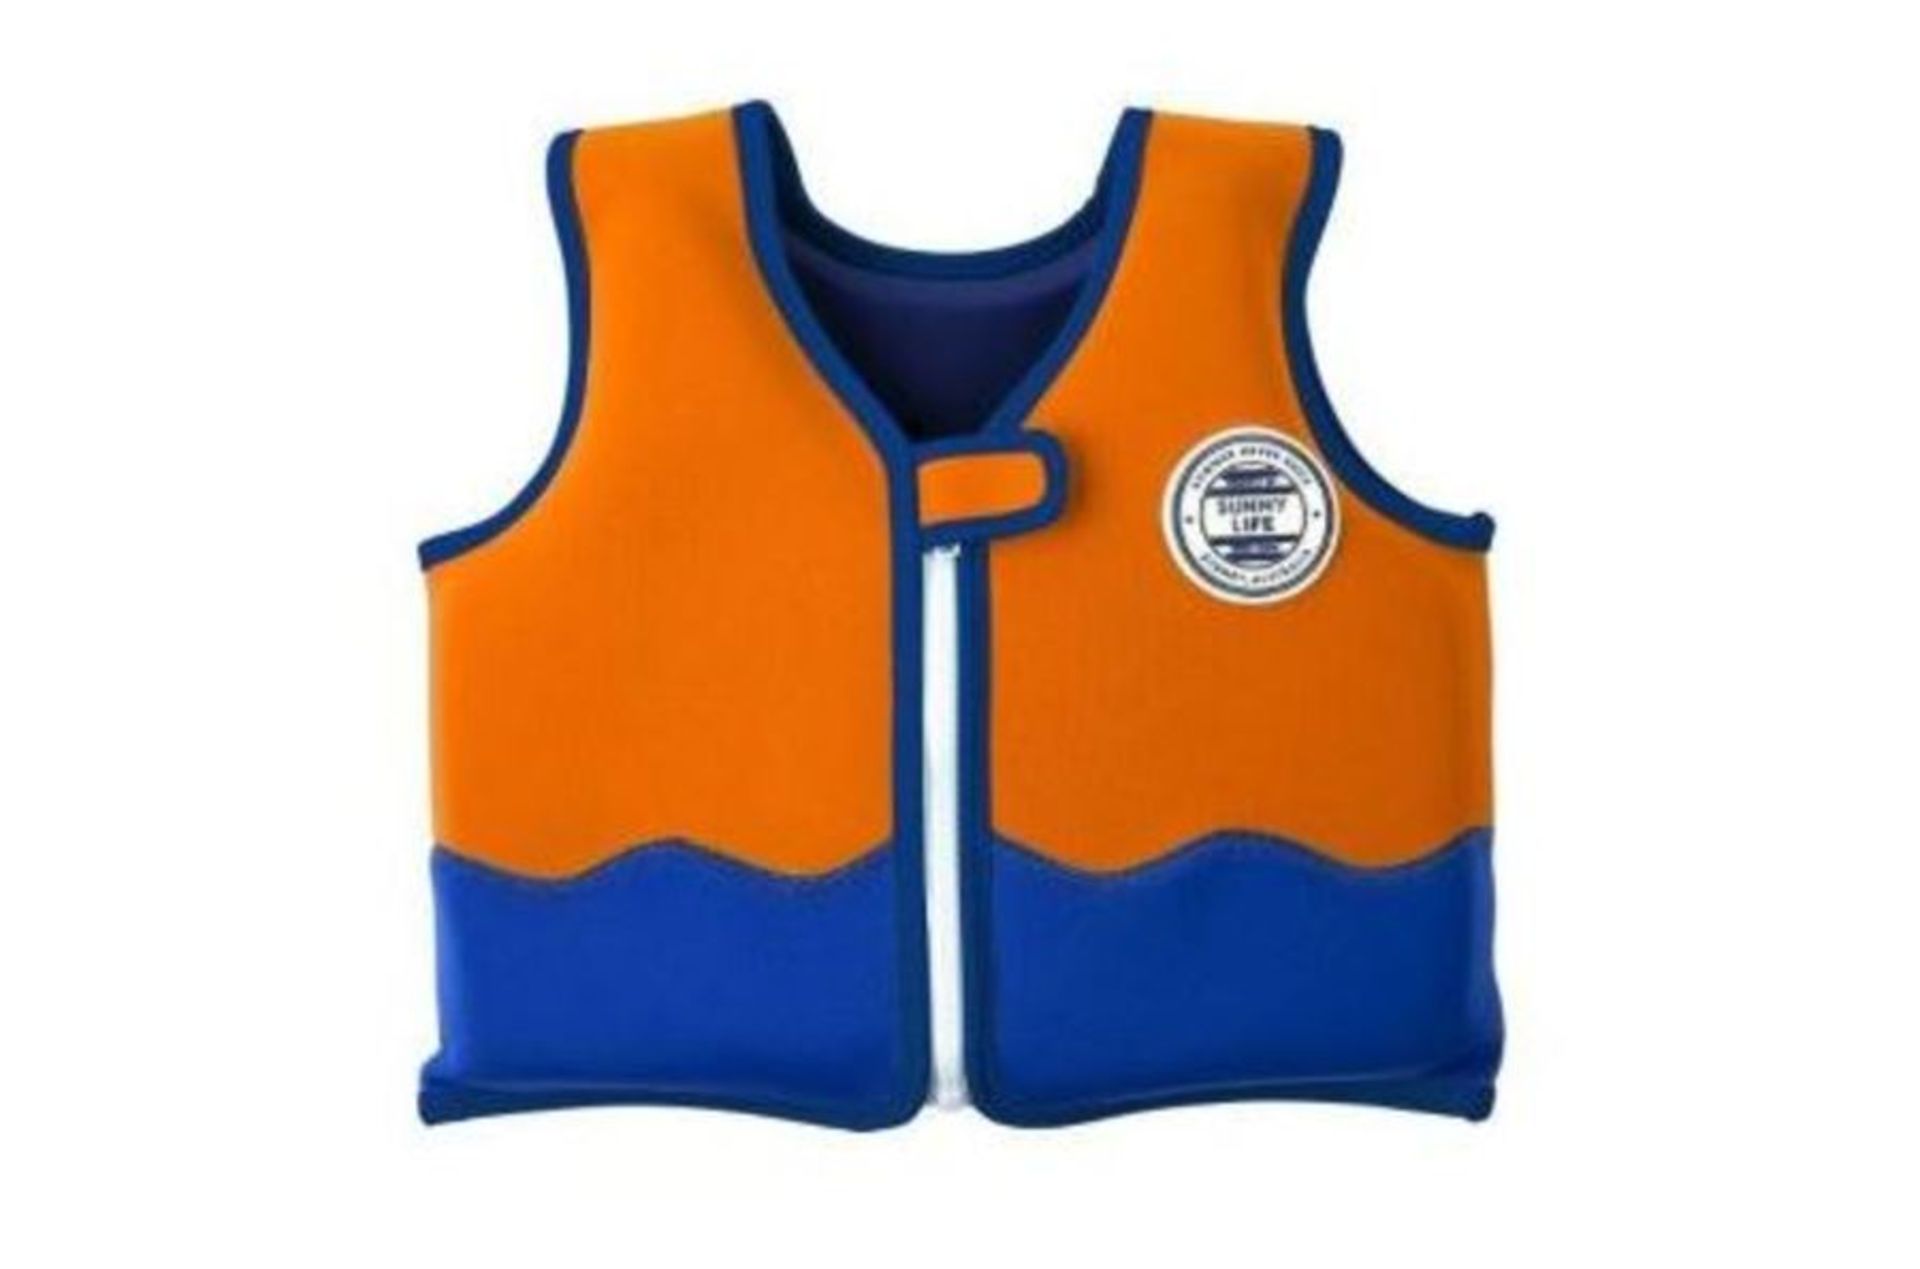 SUNNY LIFE / FLOAT VEST SHARKY / YELLOW & NAVY / 2-3 YEARS / RRP £30.00 AS NEW WITH TAGS IN ORIGINAL